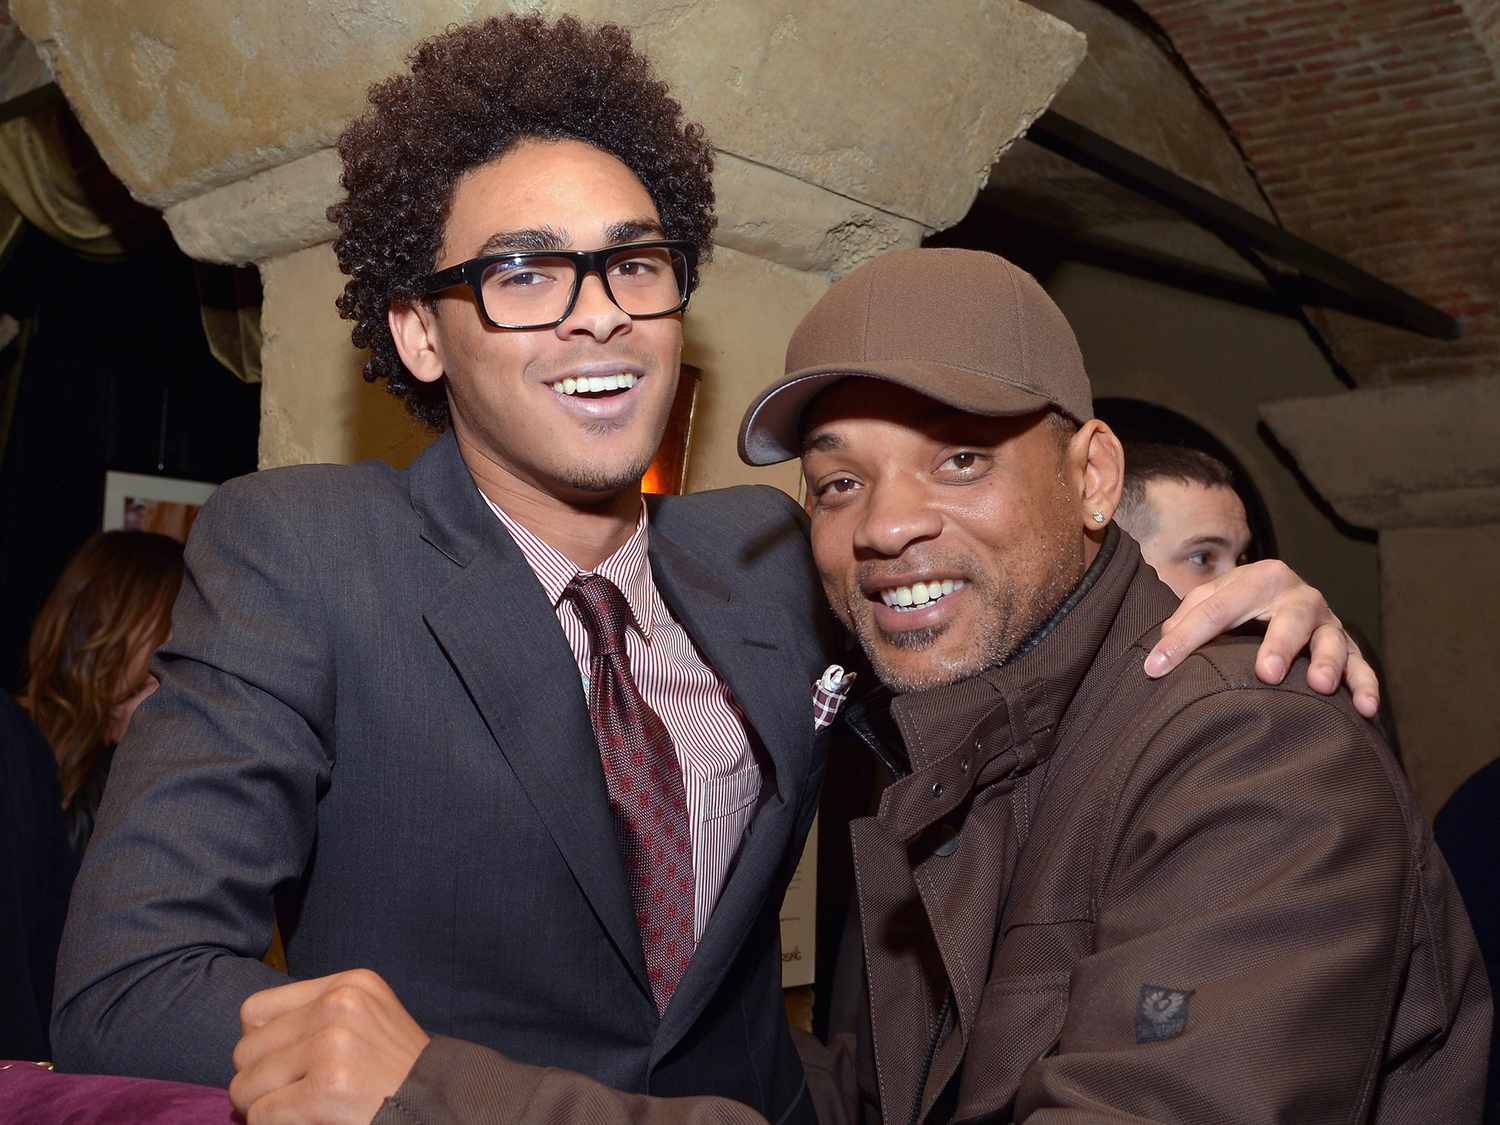 Trey Smith and Will Smith attend Vanity Fair and L'Oreal Paris-hosted D.J. Night with Freida Pinto in support of 10 x 10 and "Girl Rising" on February 19, 2013 in Los Angeles, California. 